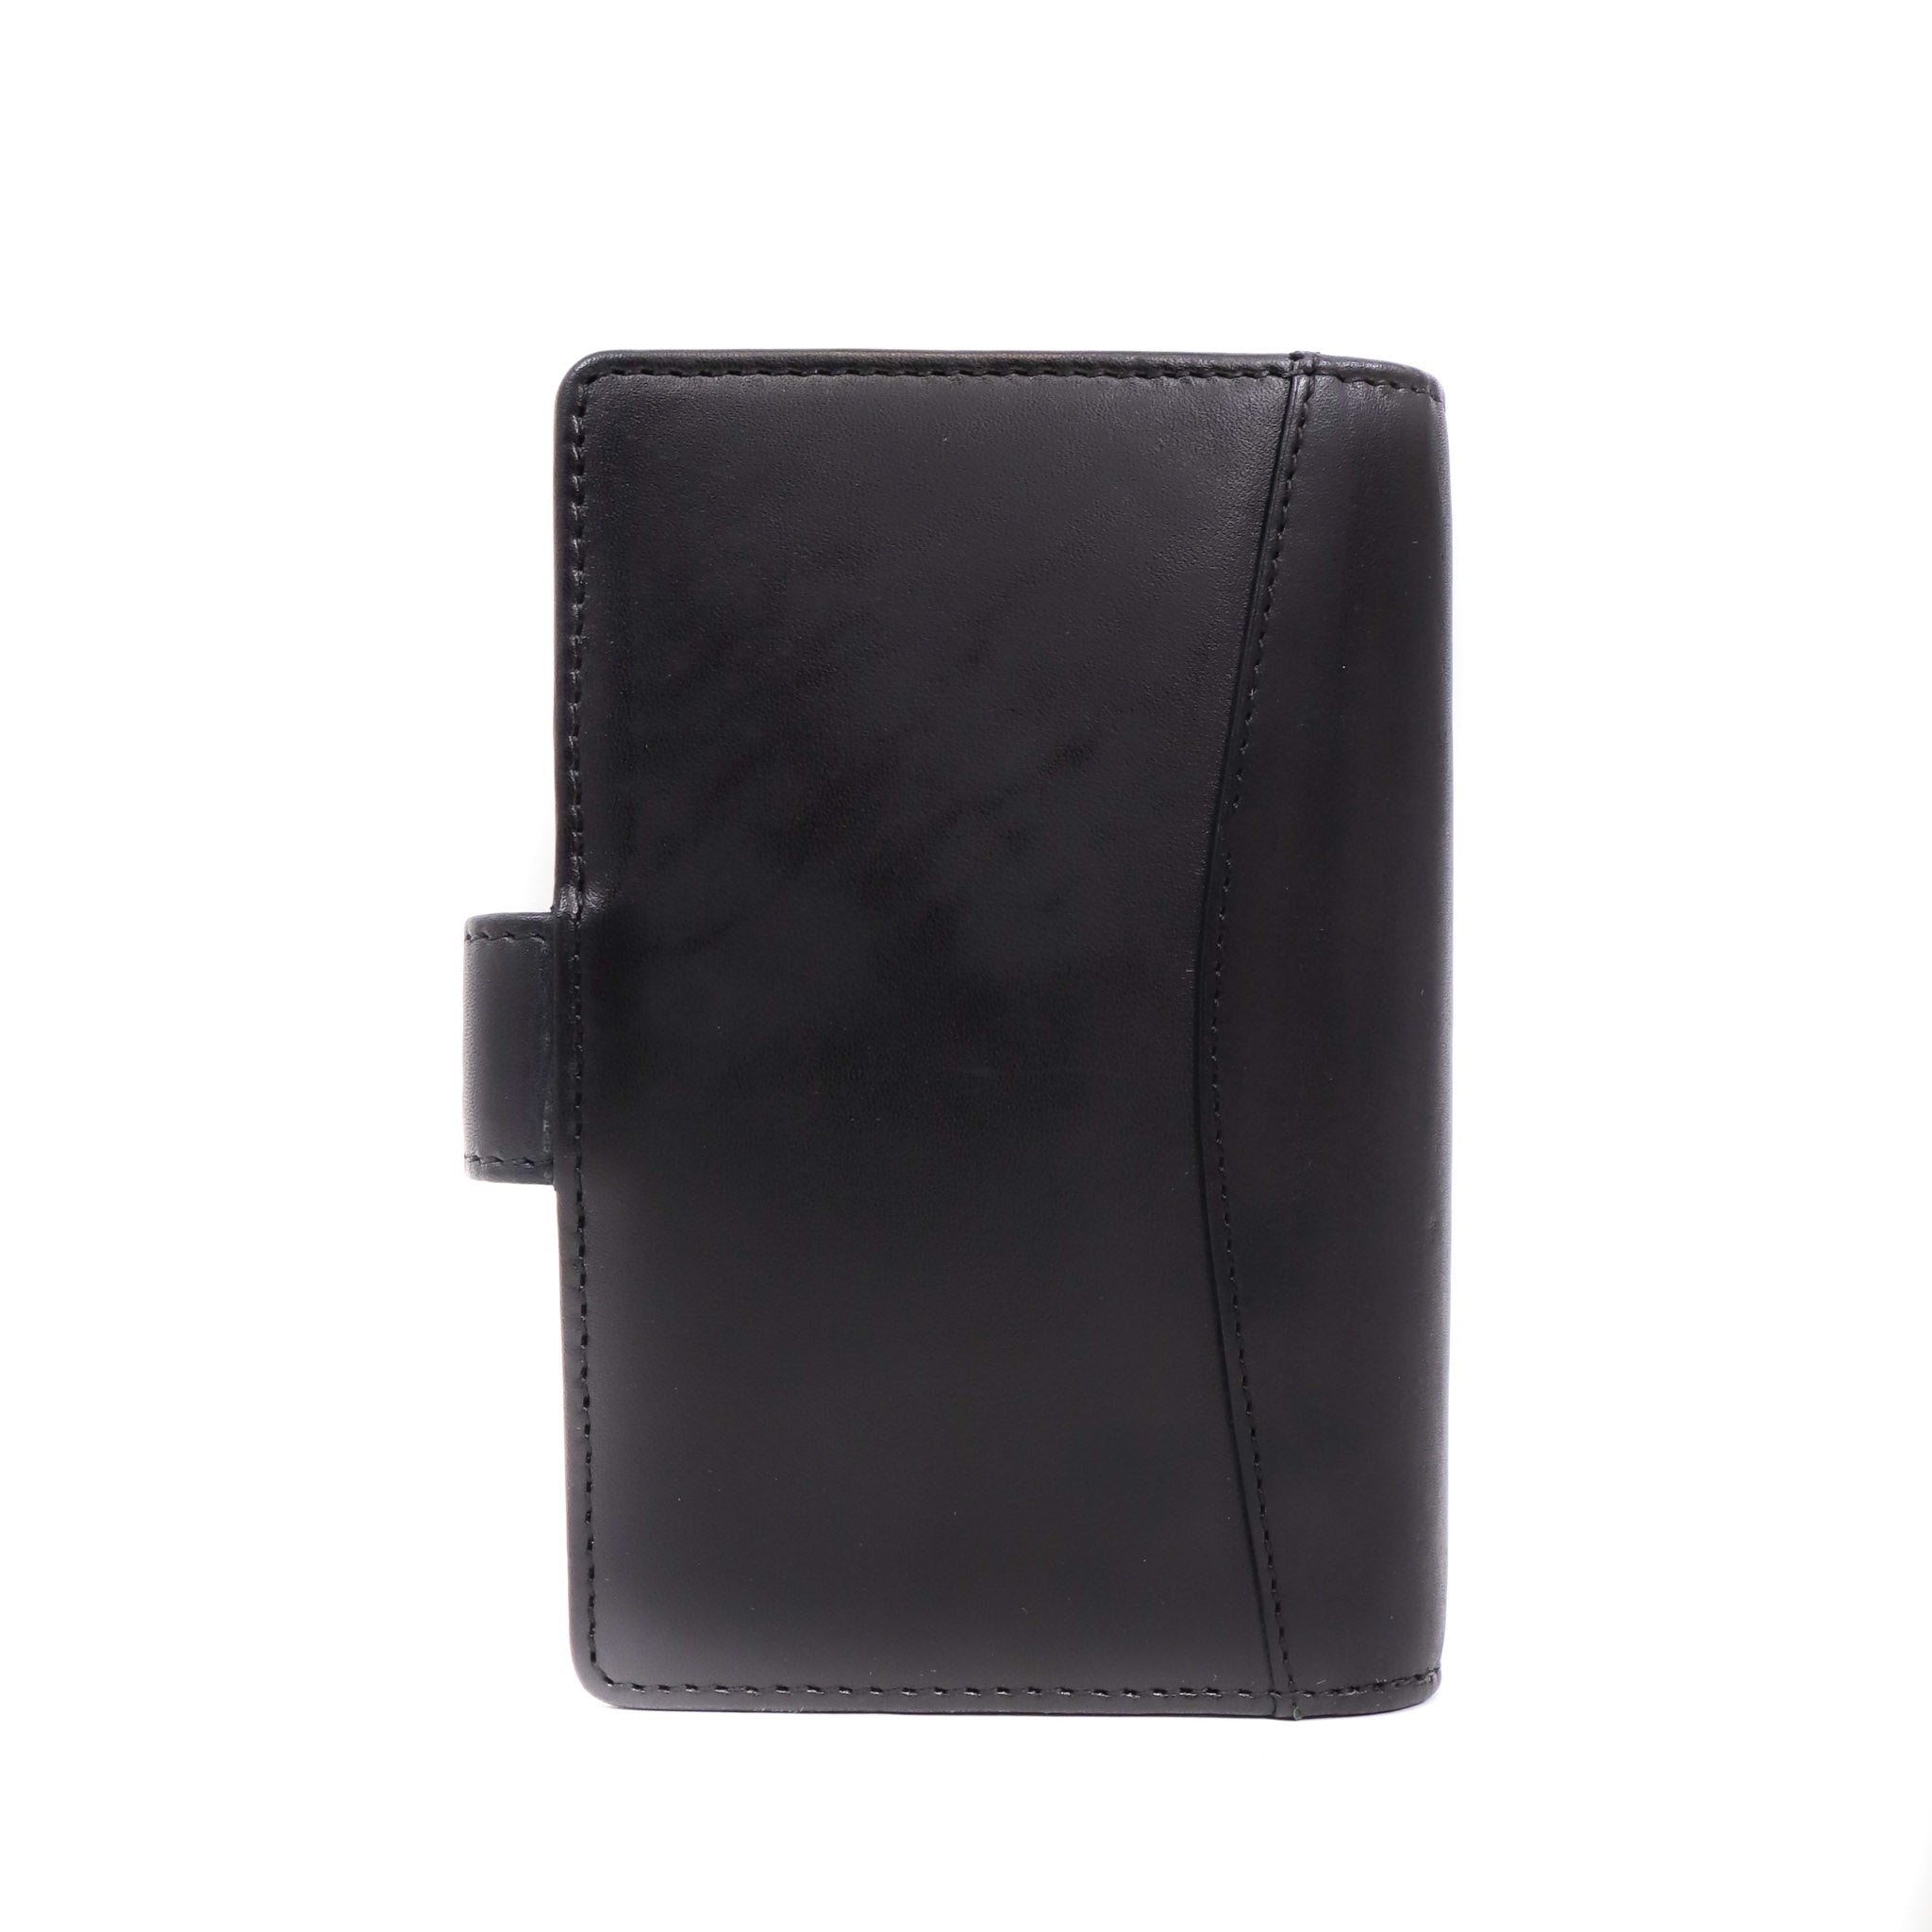 Small diary cover 'Siep' black - CL 8337